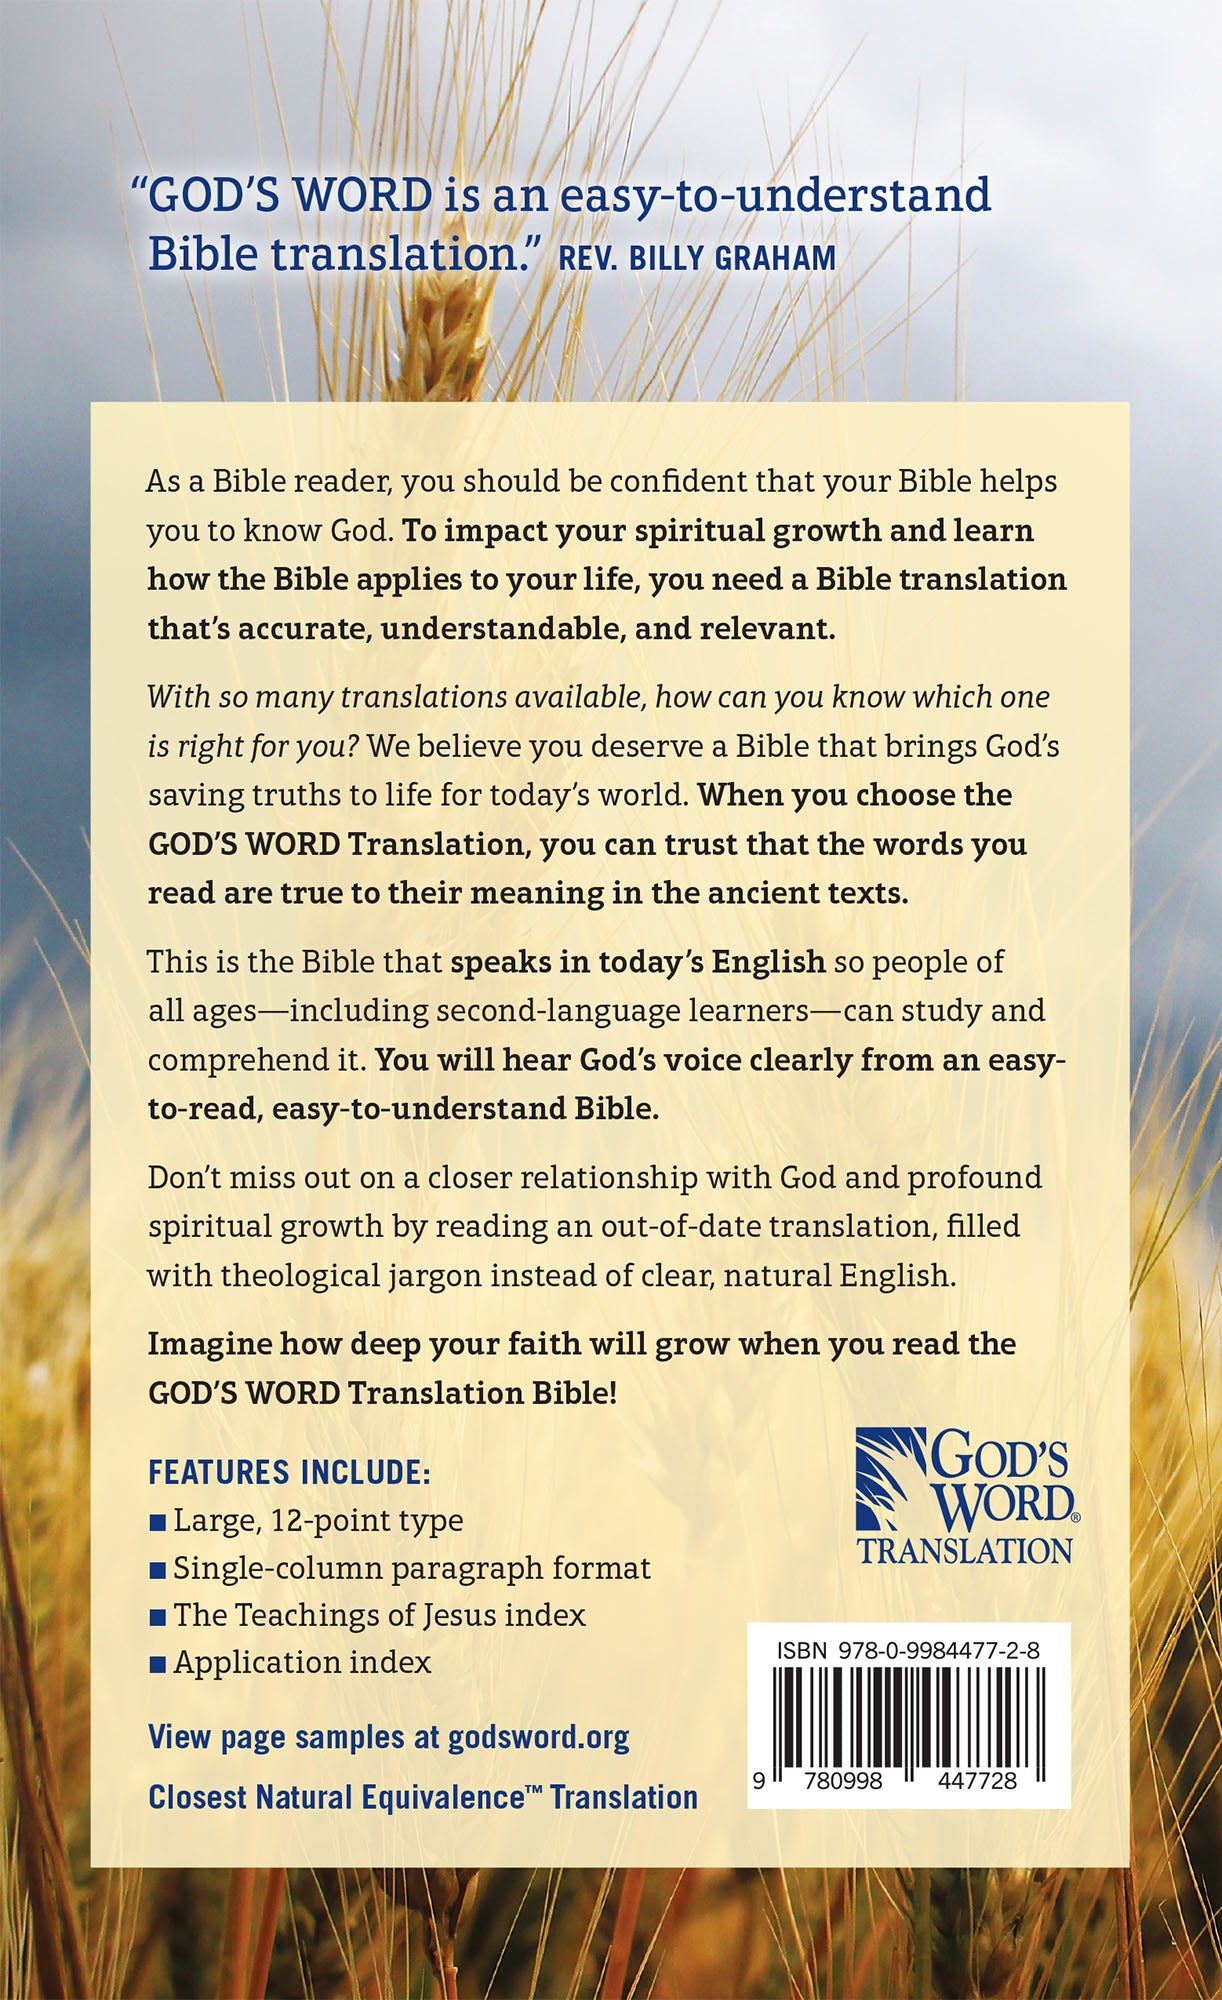 GOD’S WORD Large-Print Bible: Hardcover (Case of 12 Copies)